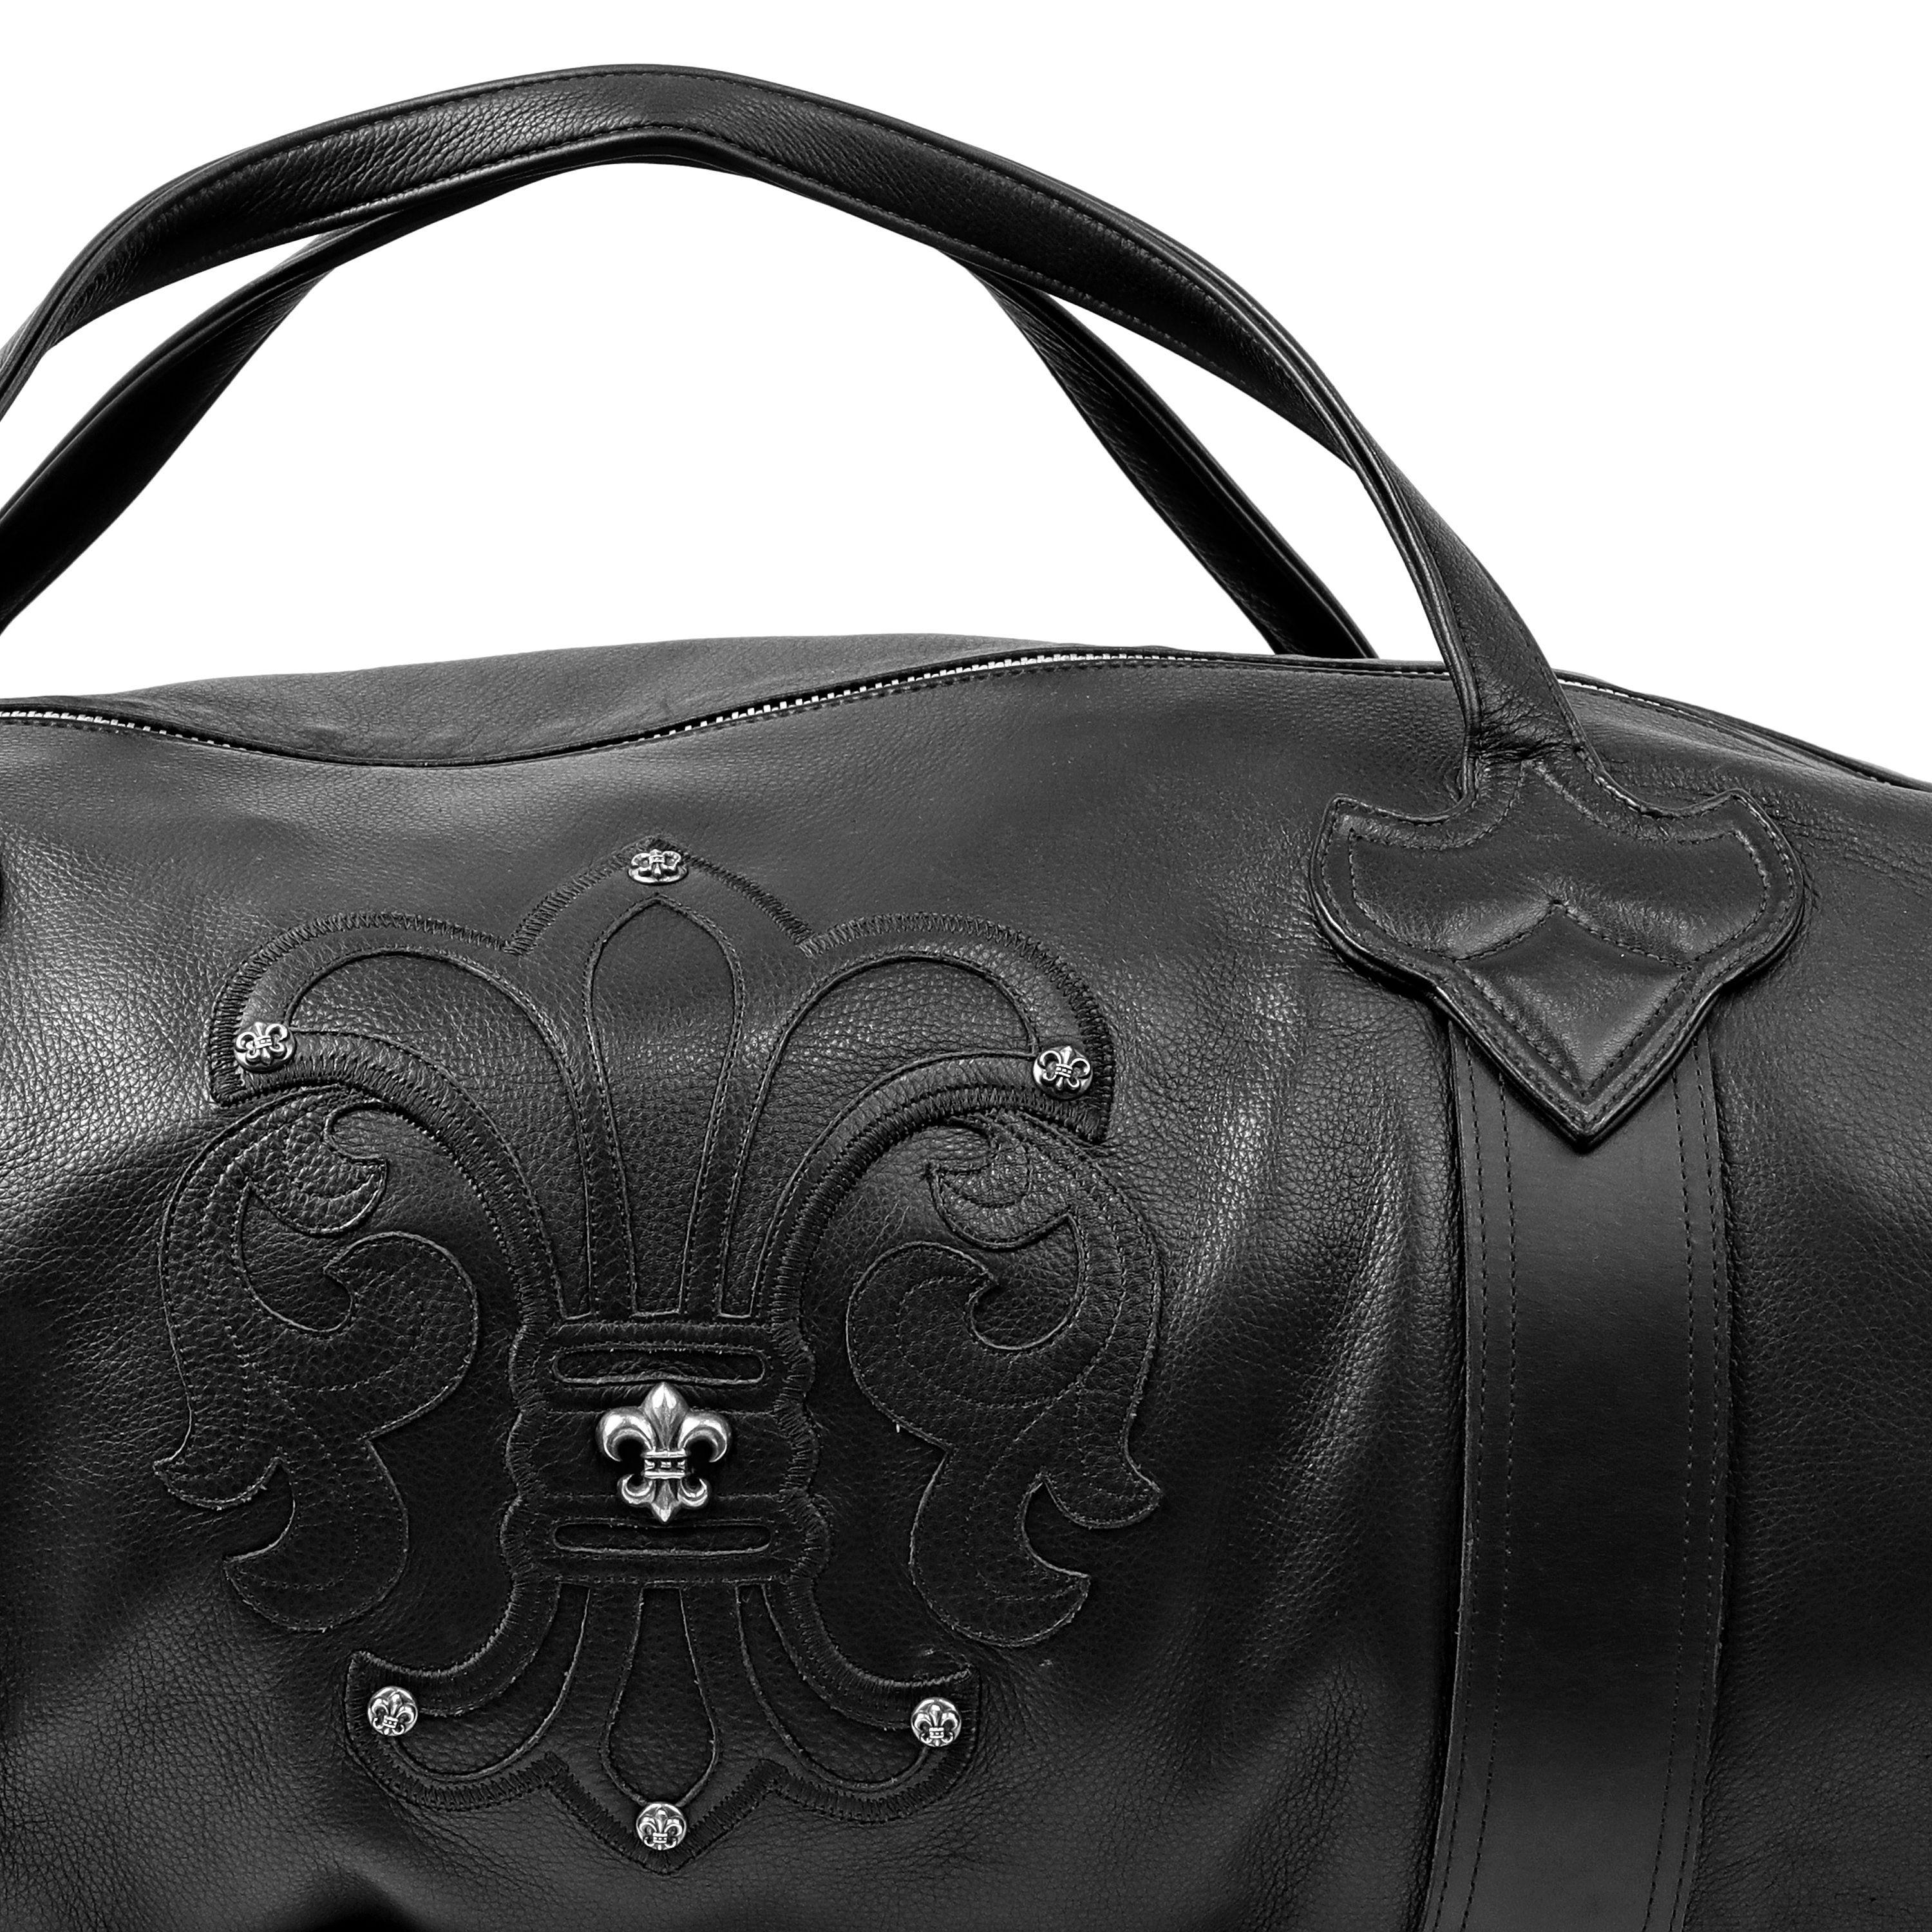 This authentic Chrome Hearts Black Limited Edition XL Travel Bag is in pristine condition.  Black glove leather duffle style travel bag.  Extra large capacity, silver hardware zippered top, double handles.

PBF 14052